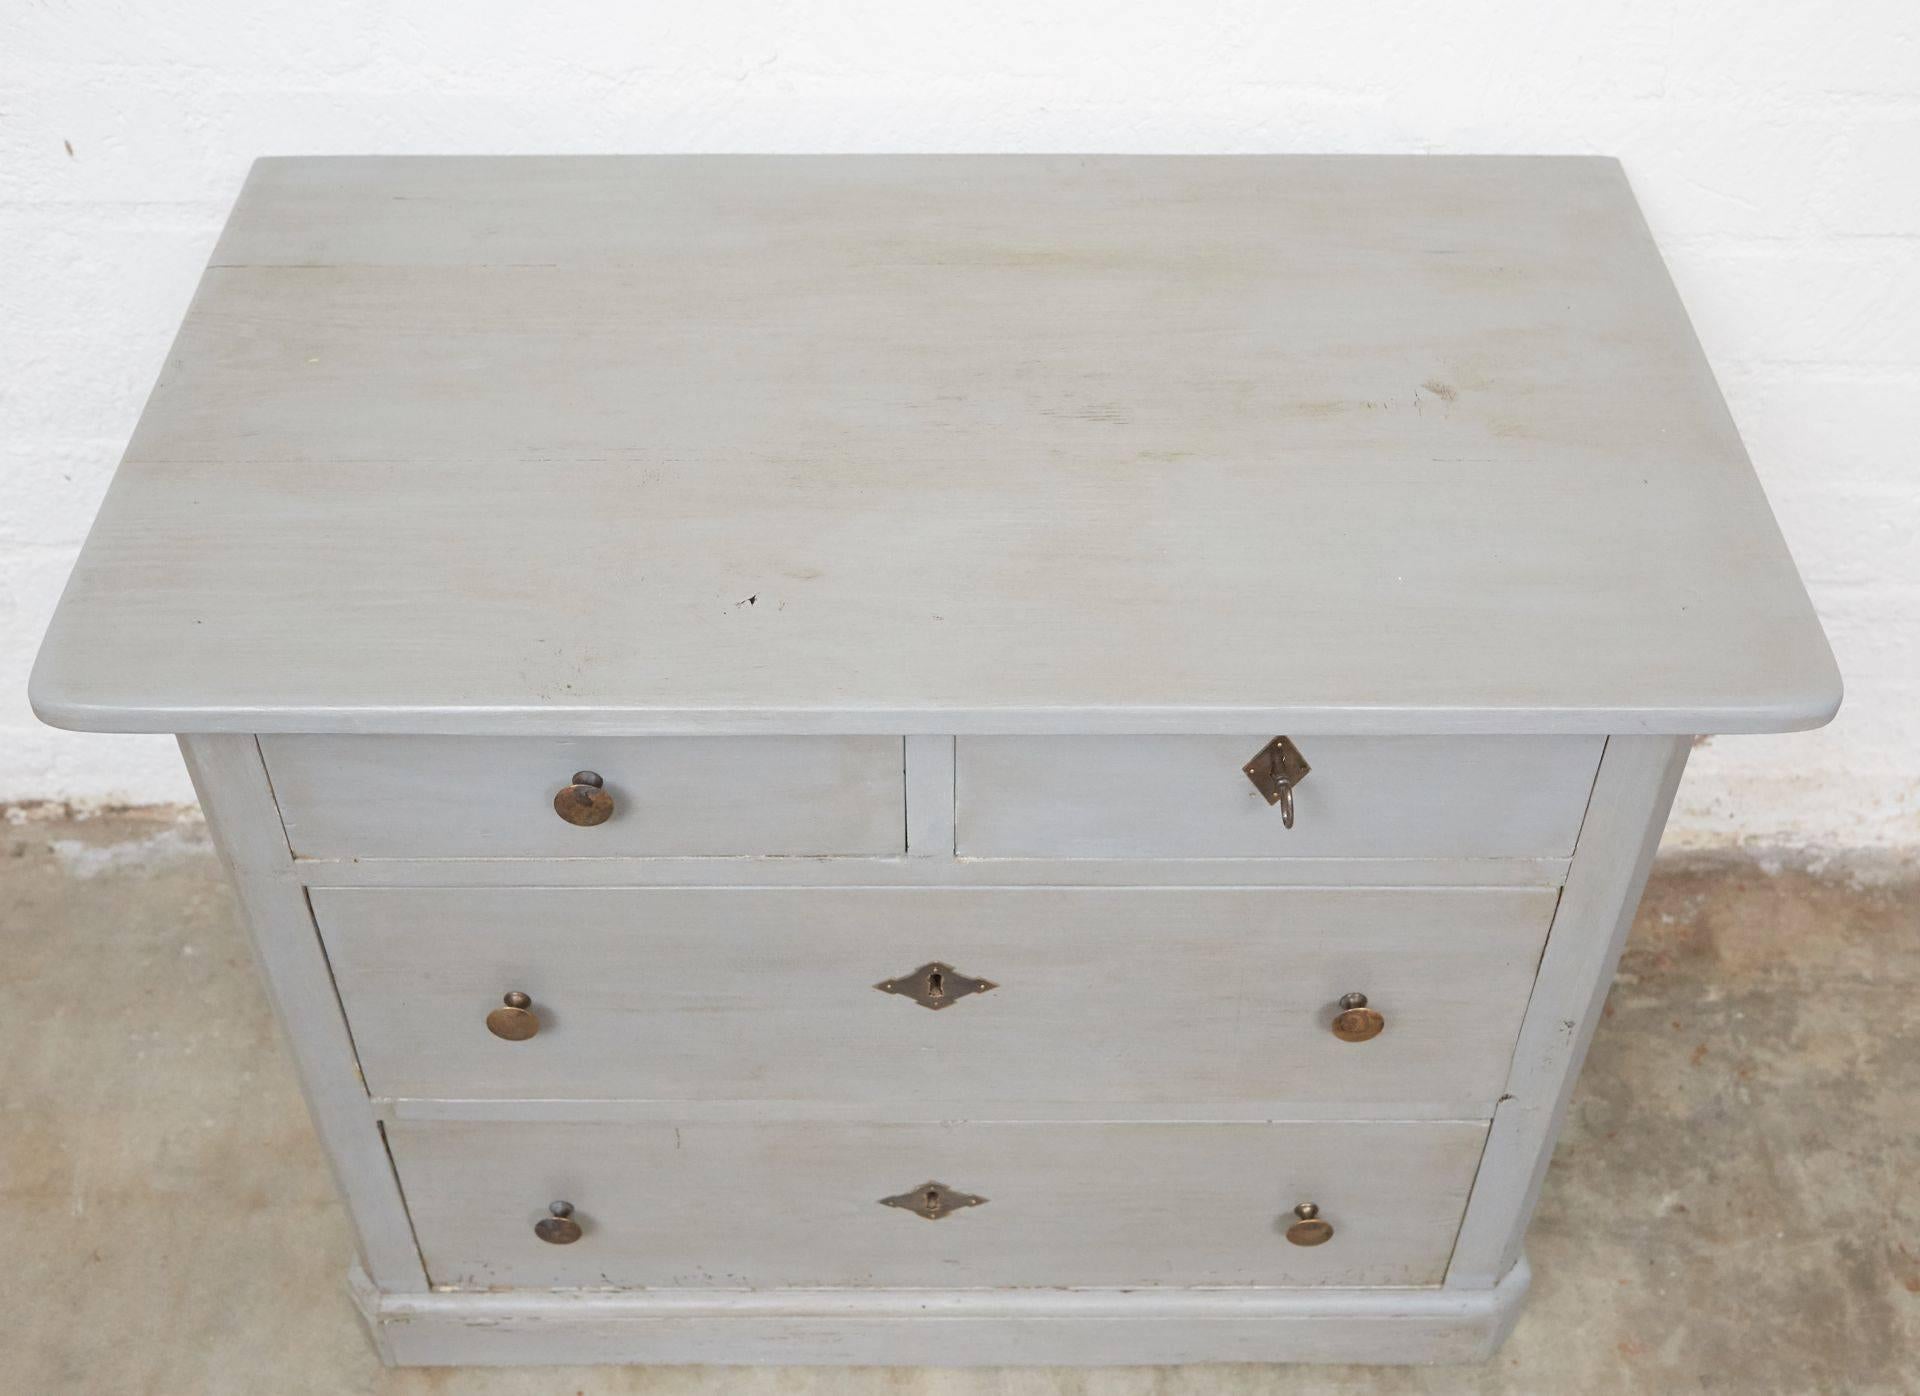 This grey painted chest of drawers has brass knobs and escutcheons. The top right drawer has a lock and key and can be used for your valuables. The chest is a good size for a bedside piece. 

 